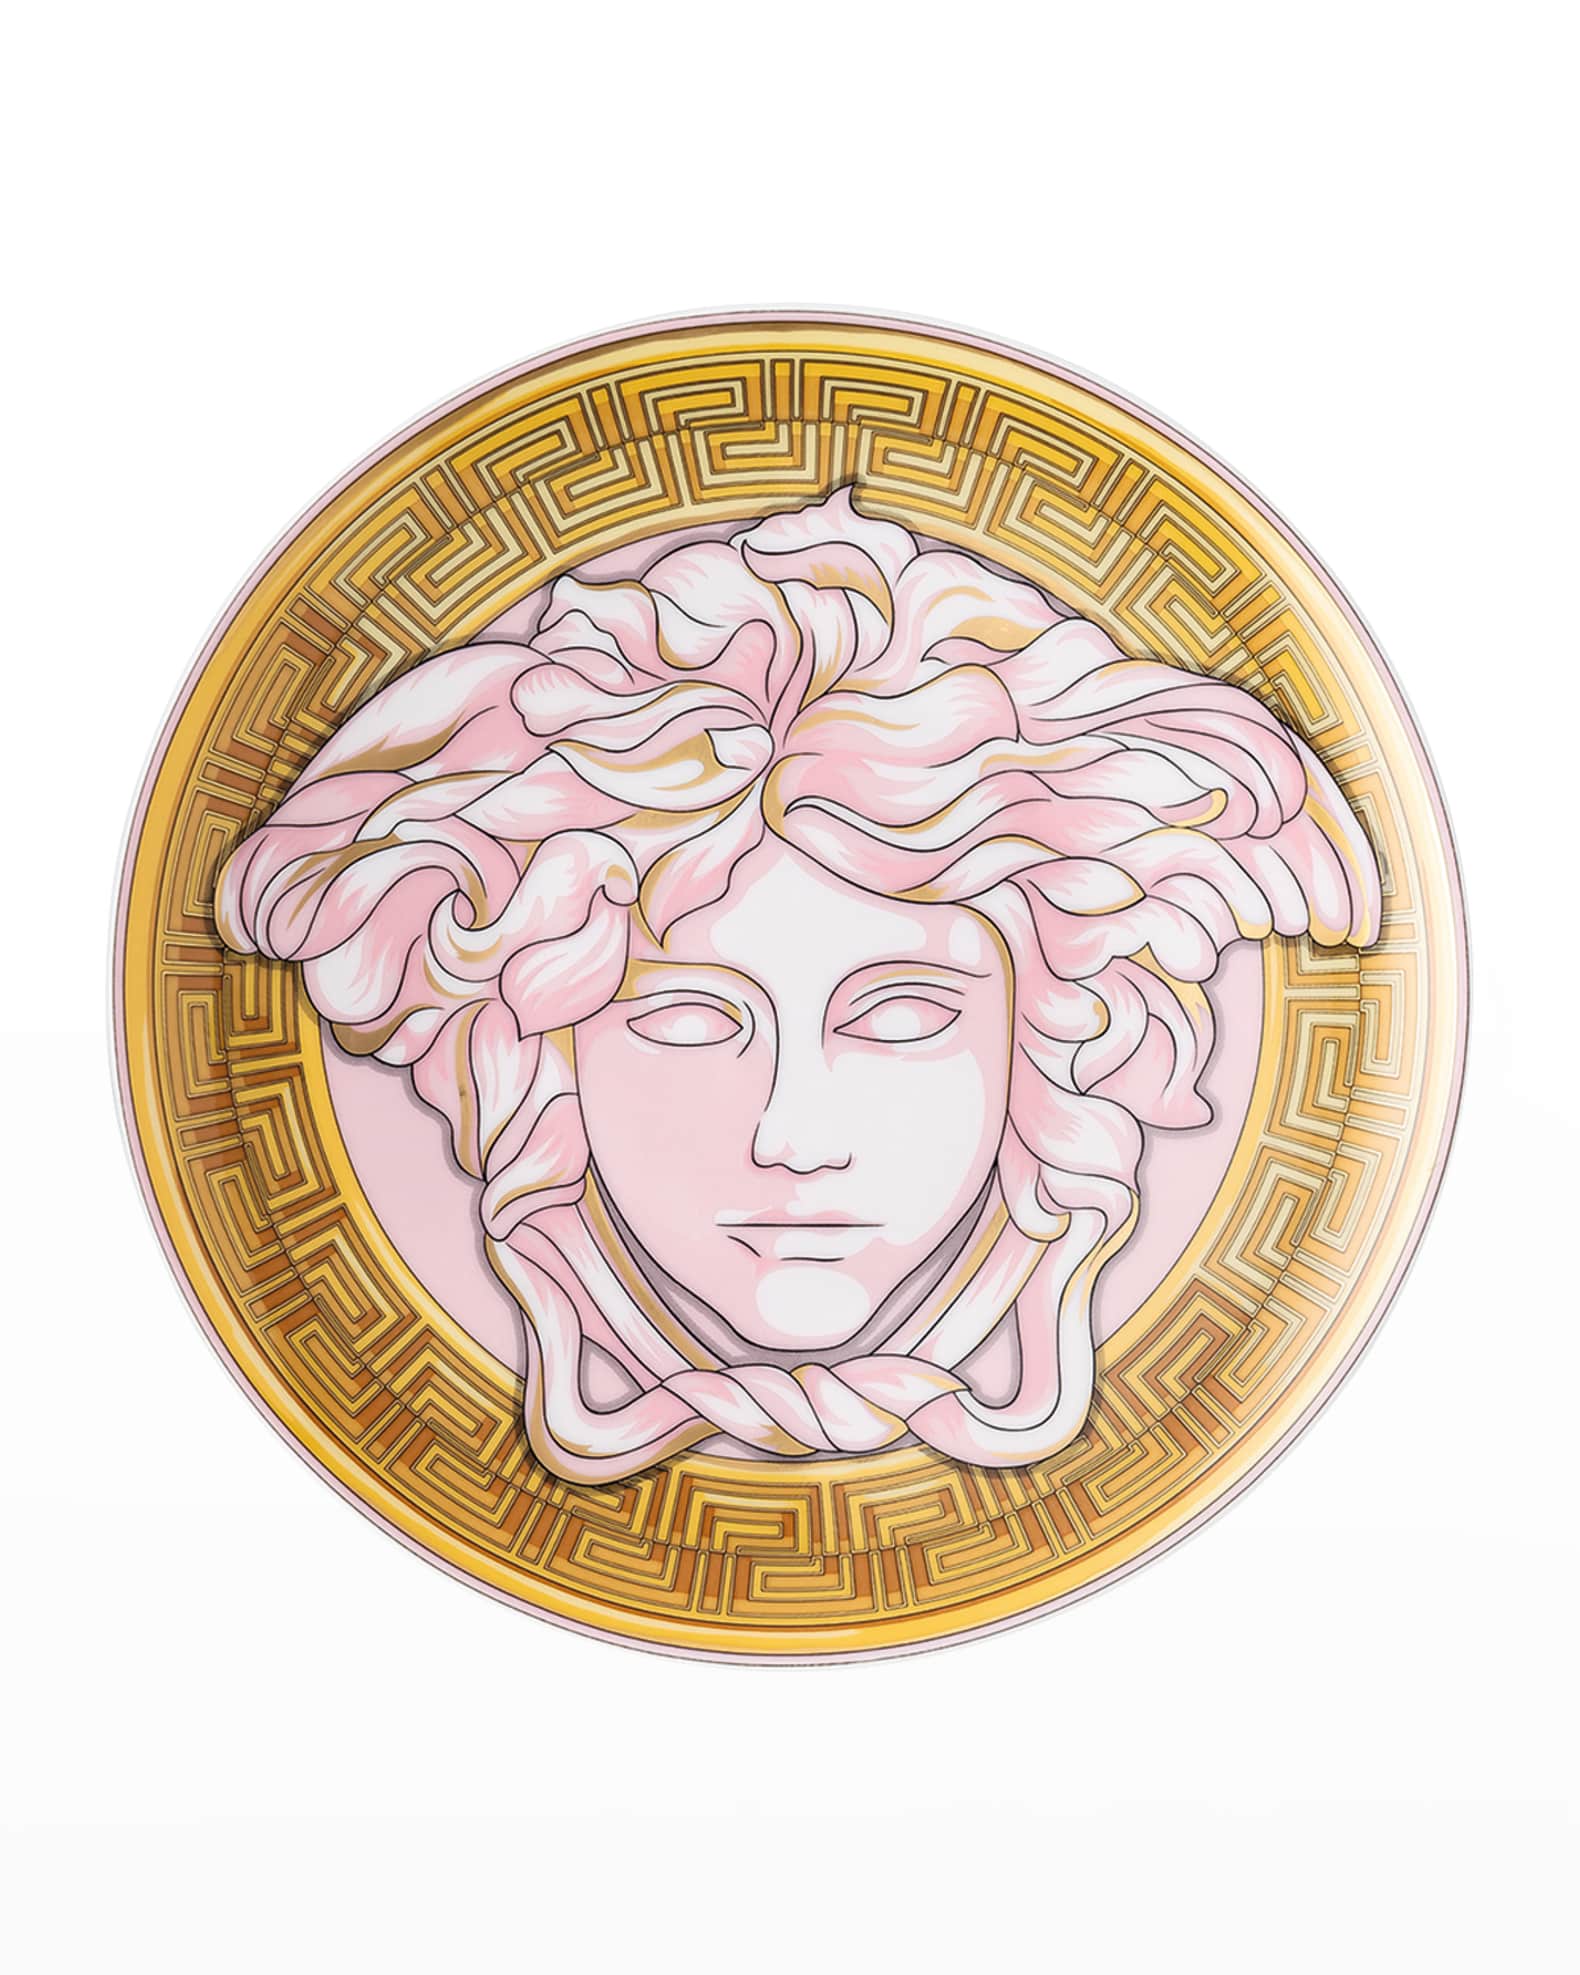 Versace Medusa Amplified Pink Coin Bread and Butter Plate | Neiman Marcus